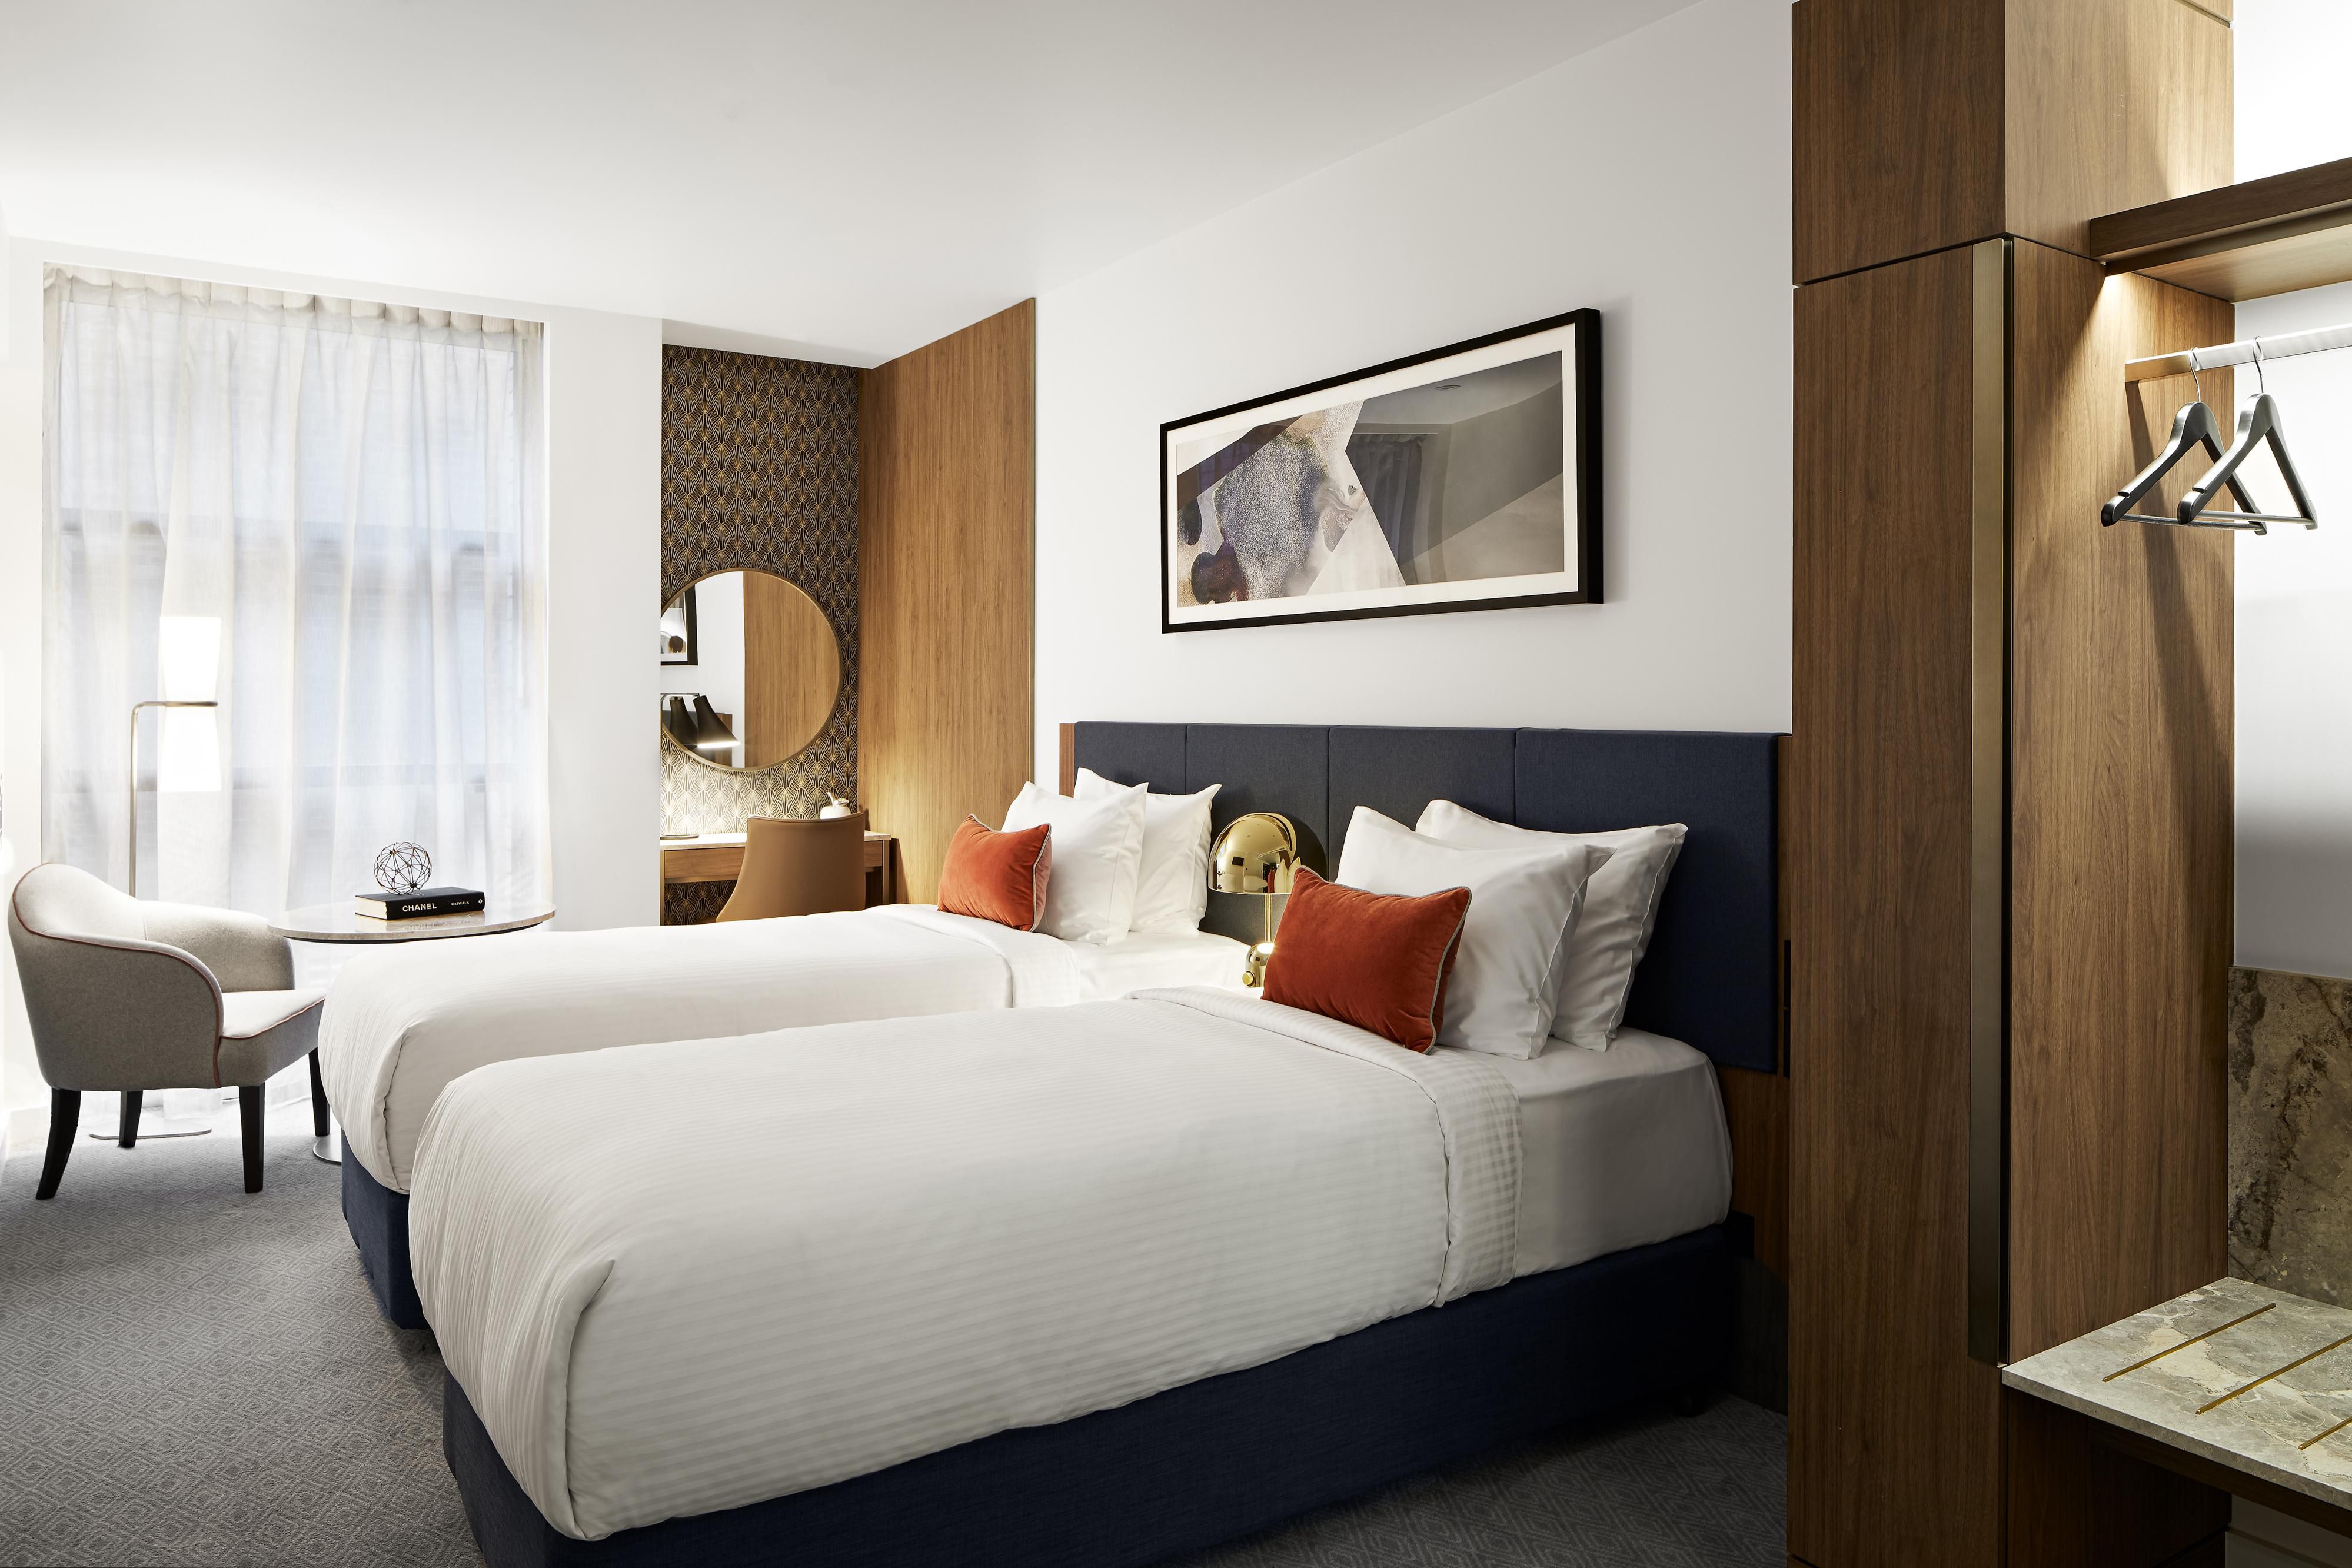 Standard guest rooms with the choice of king or twin configuration